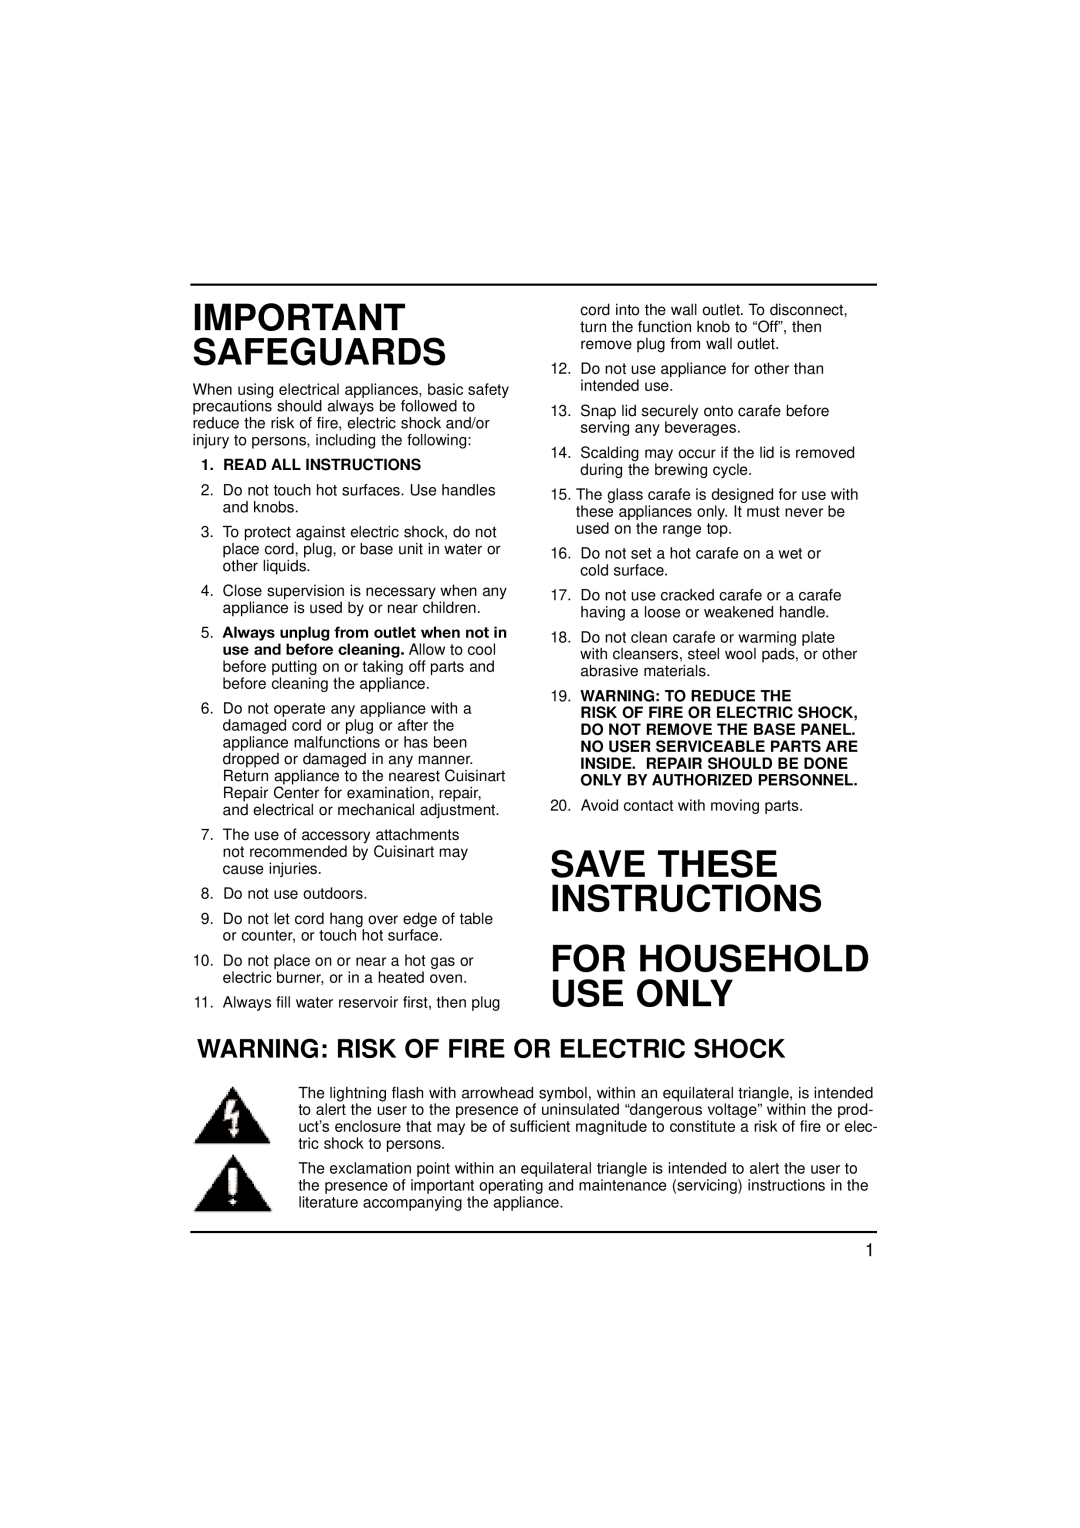 Cuisinart DCC-1000, 73289 manual Warning Risk Of Fire Or Electric Shock, Important Safeguards, Read All Instructions 